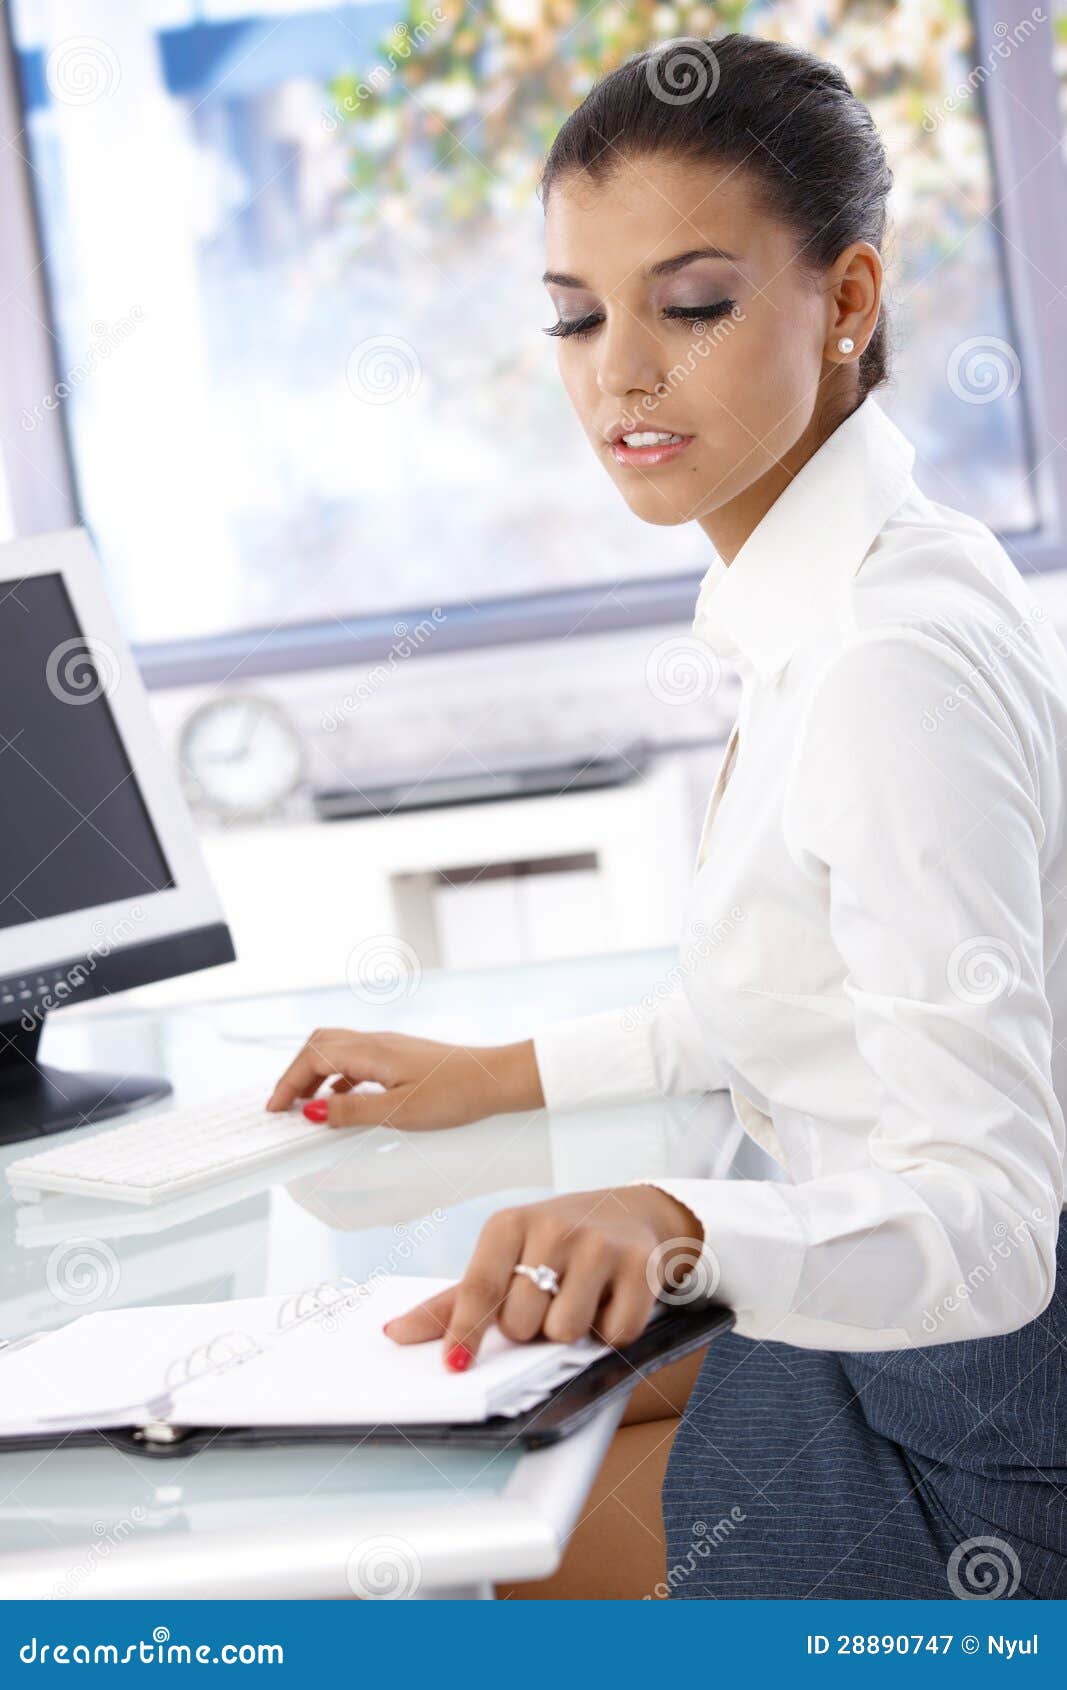 Young Office Worker Sitting At Desk Royalty Free Stock